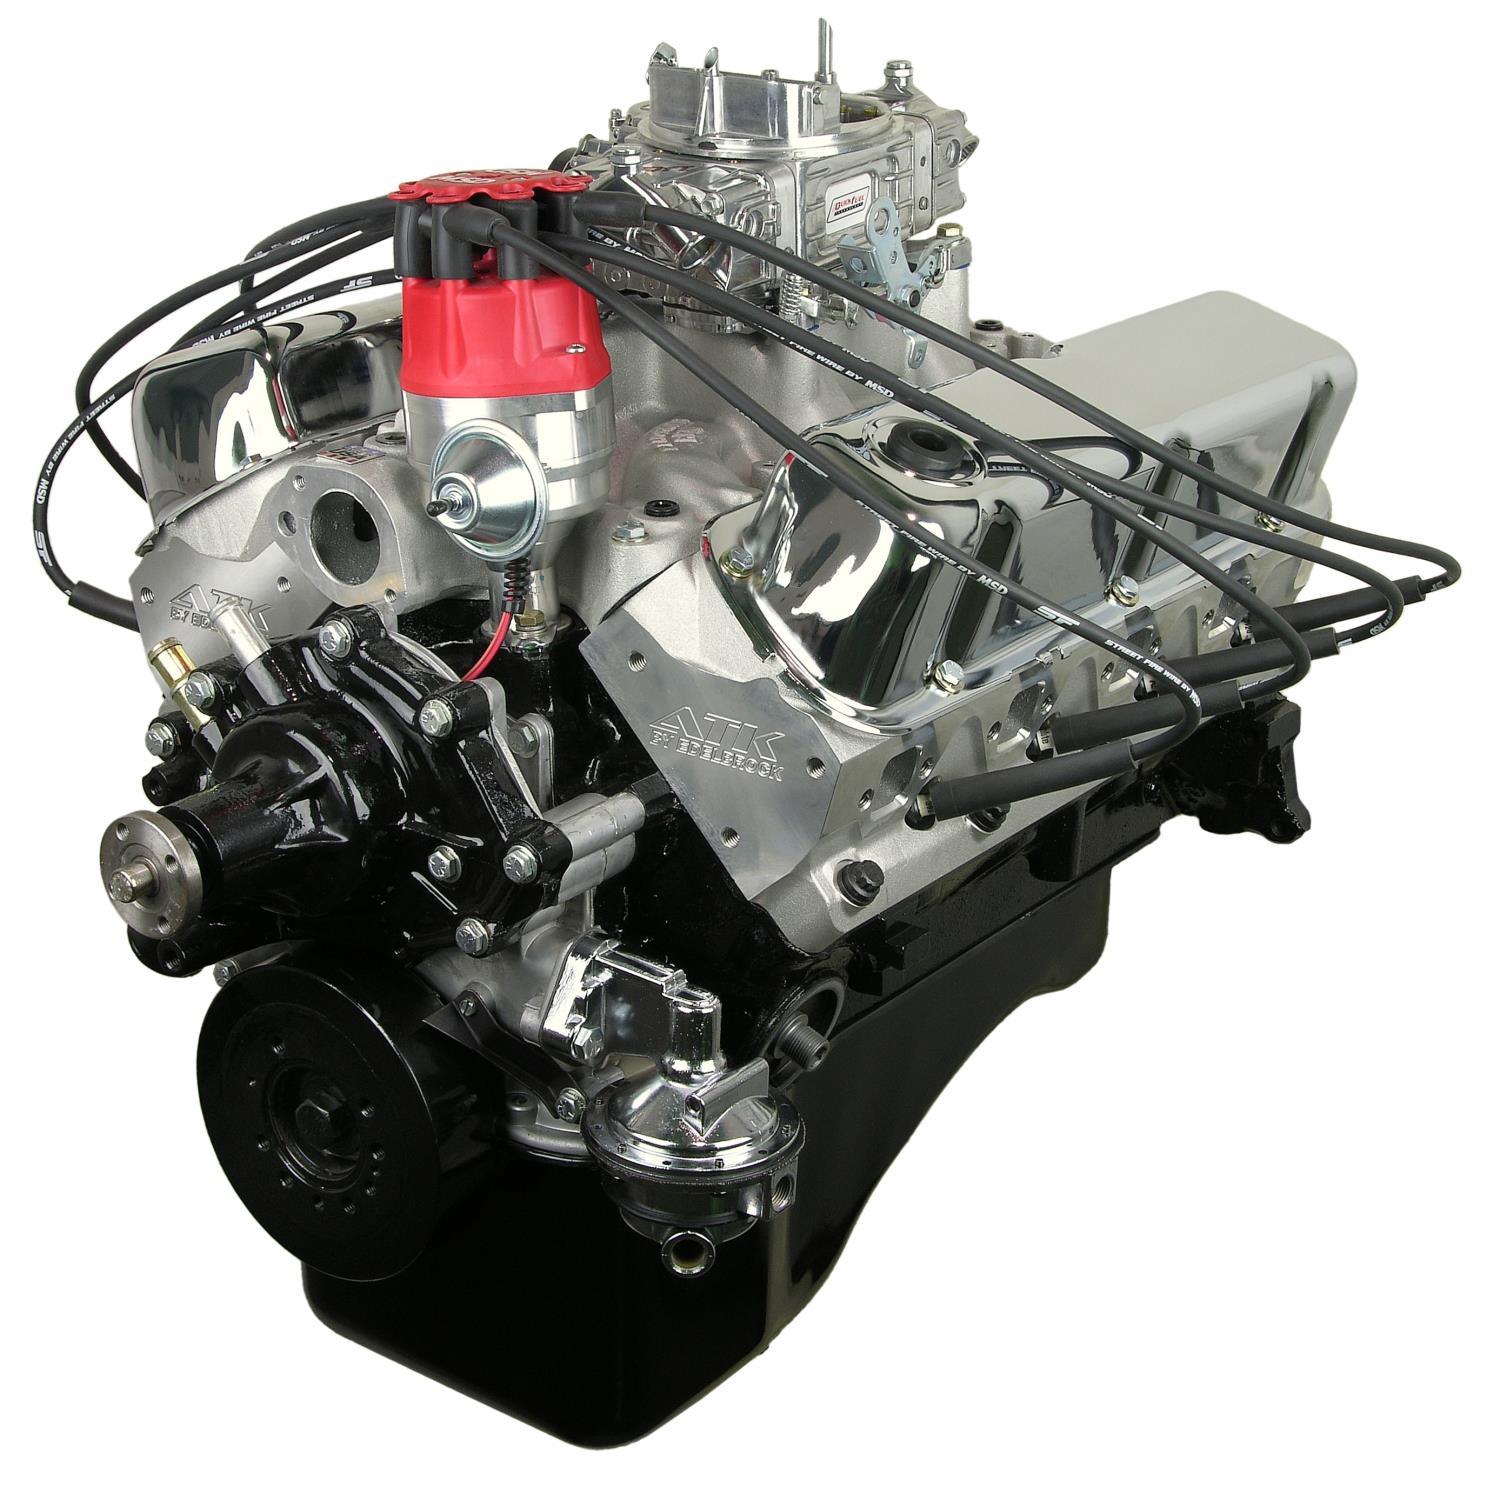 HP08C High Performance Crate Engine Small Block Ford 302ci / 375HP / 380TQ